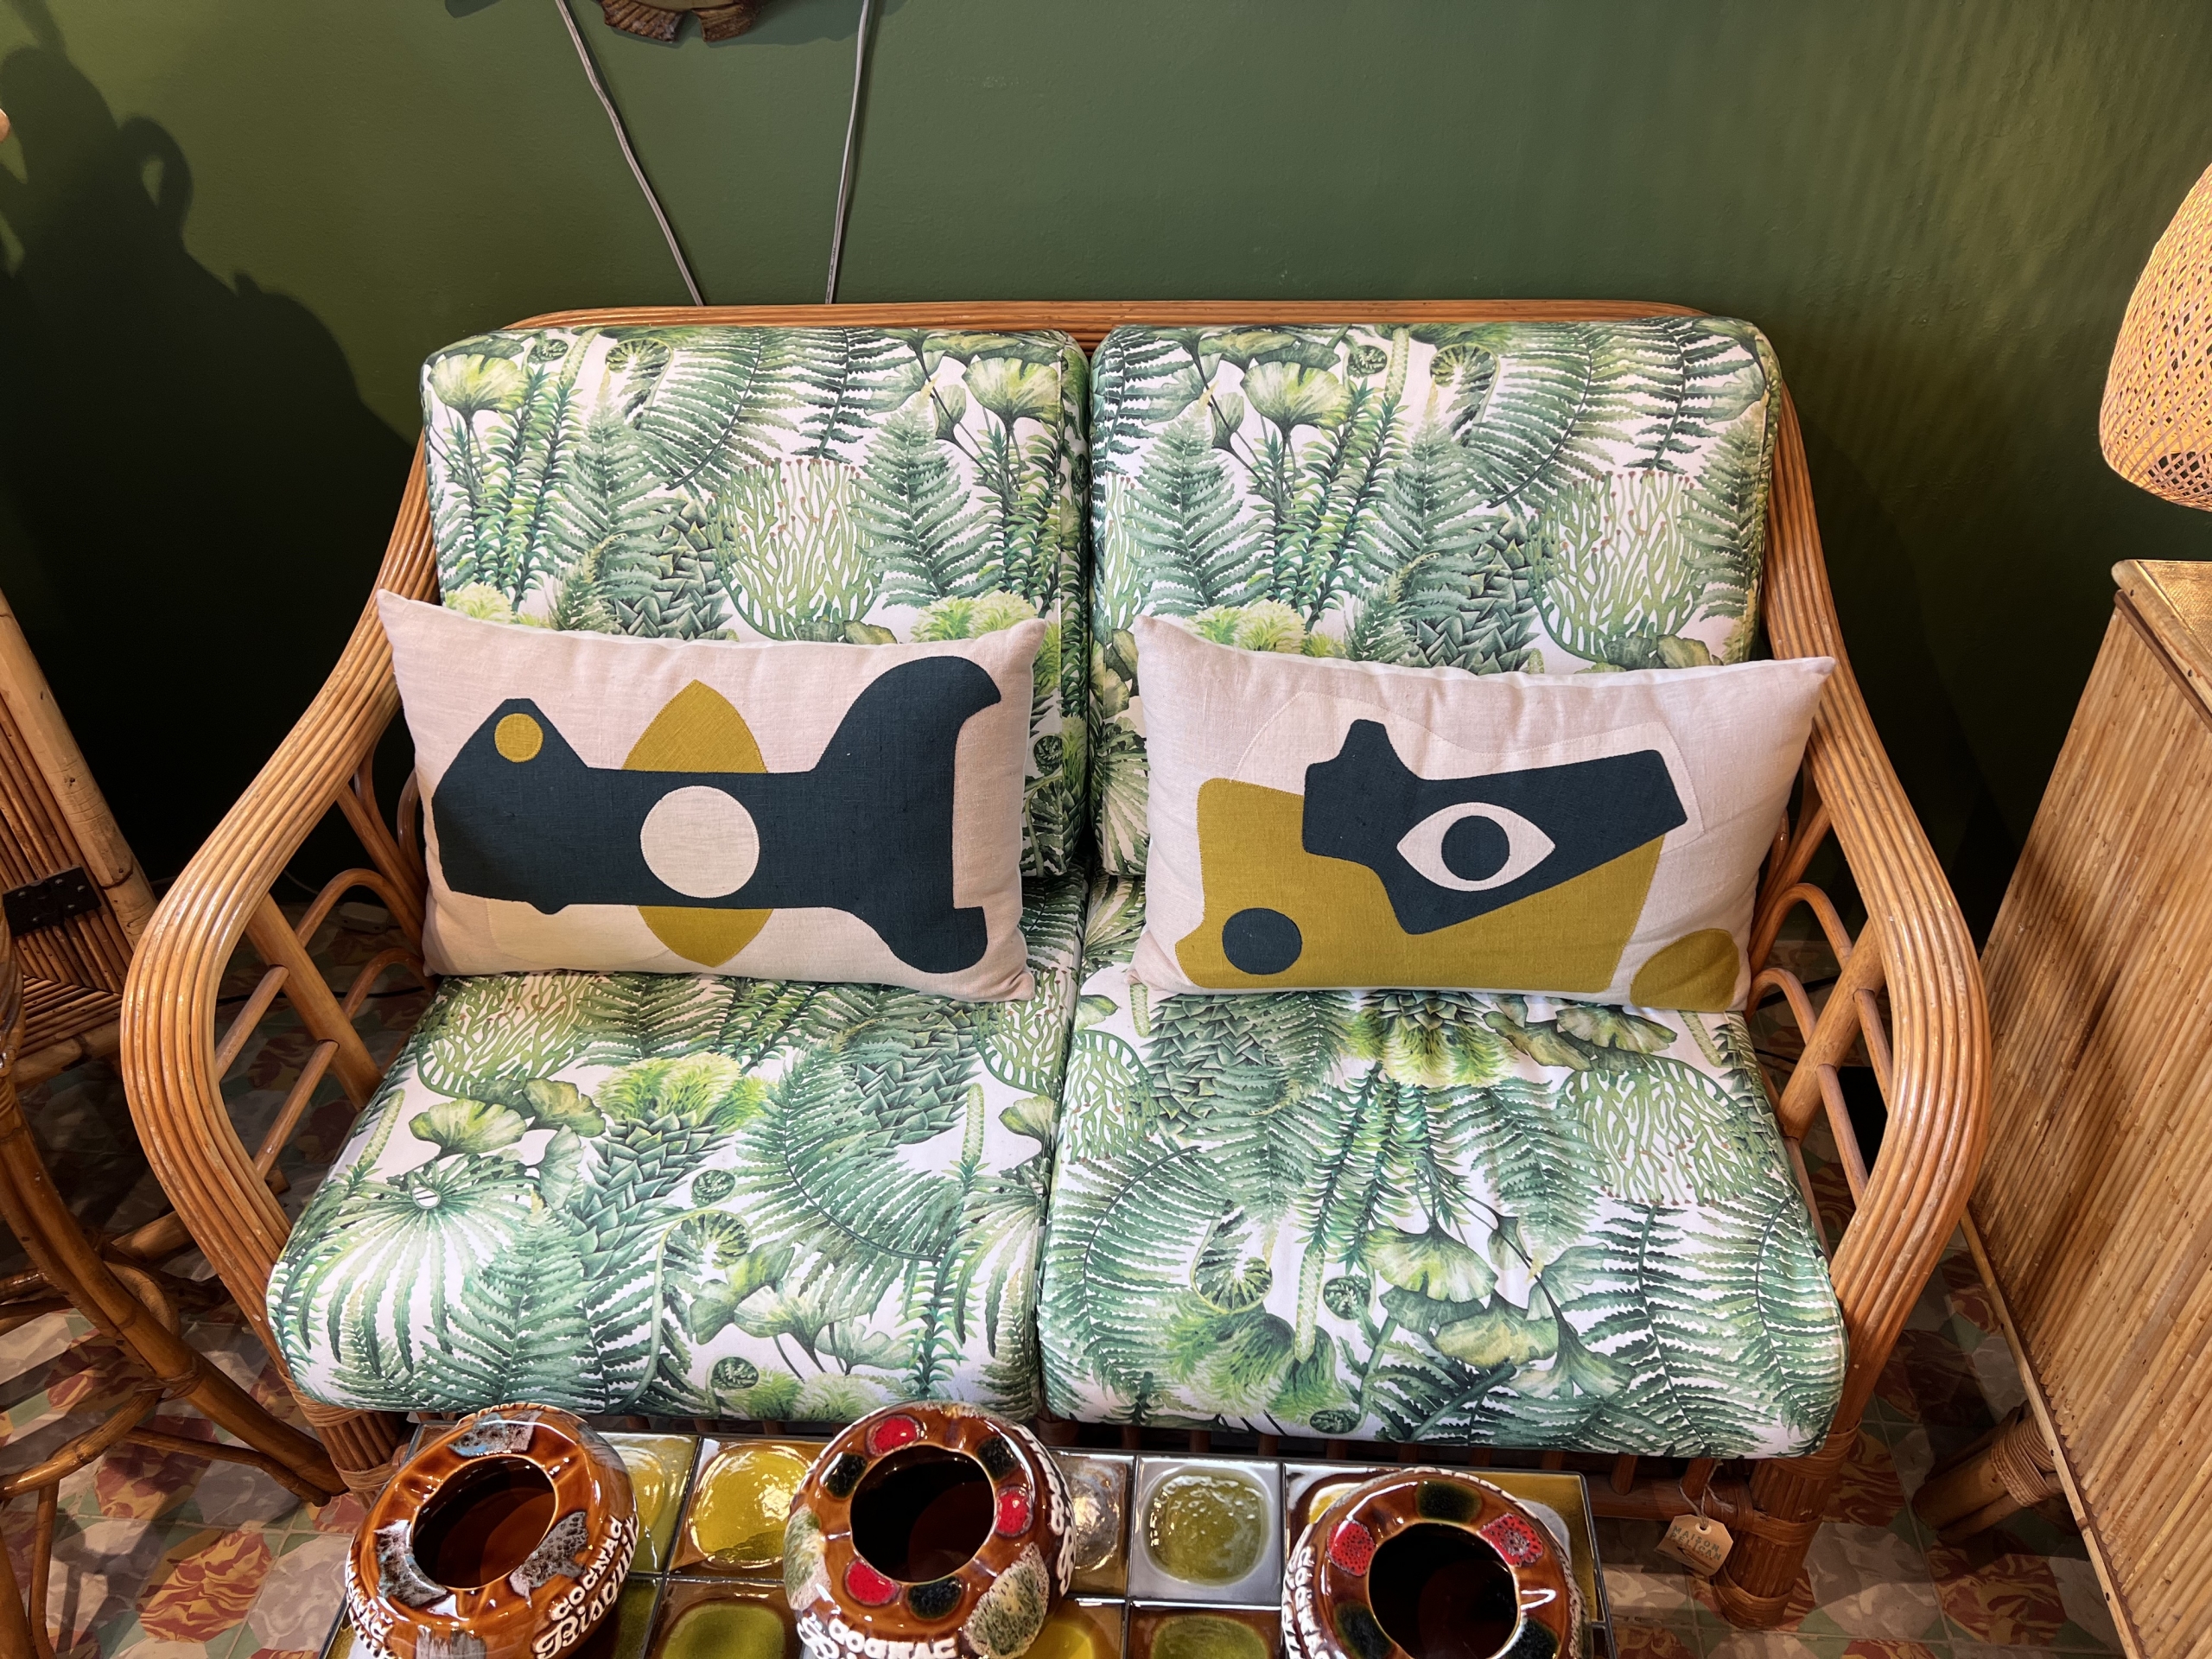 rattan couch⎮jungle⎮jungle style⎮rattan⎮couch⎮vintage⎮handmade⎮cushion⎮green